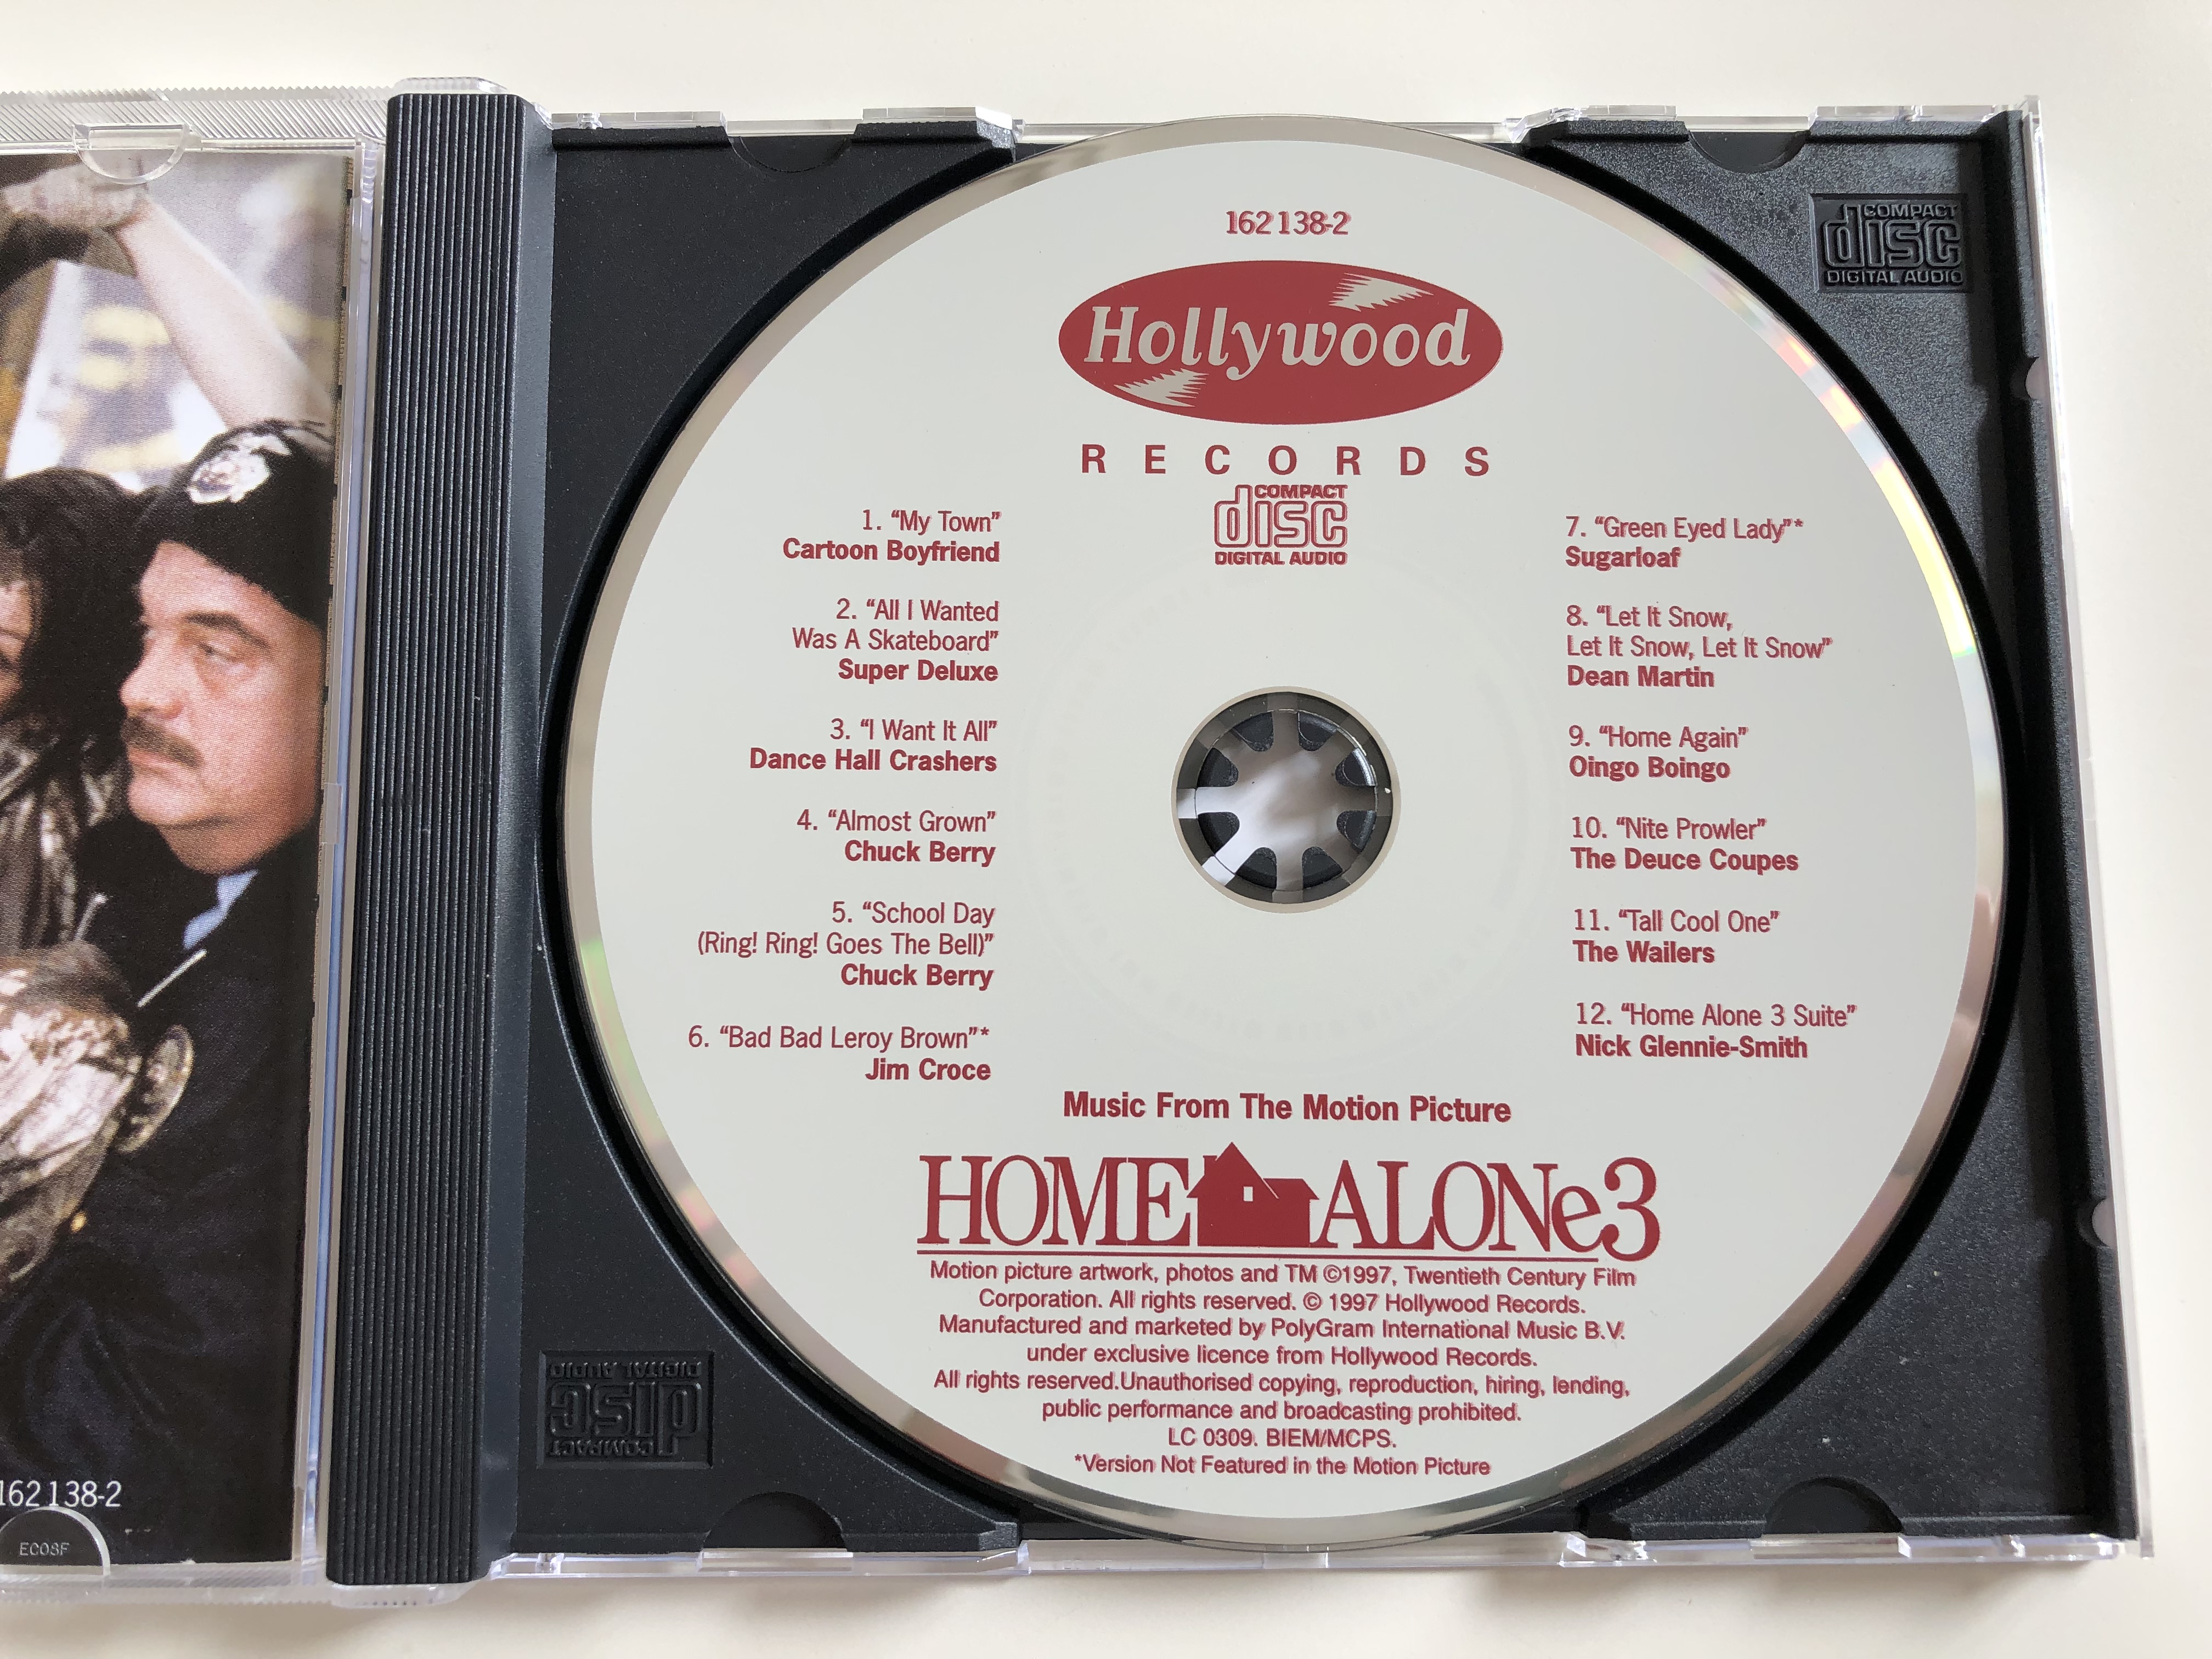 home-alone-3-music-from-the-motion-picture-featuring-cartoon-boyfriend-super-deluxe-chuck-berry-dean-martin-the-wailers-audio-cd-1997-hollywood-records-162-138-2-py-900-4-.jpg